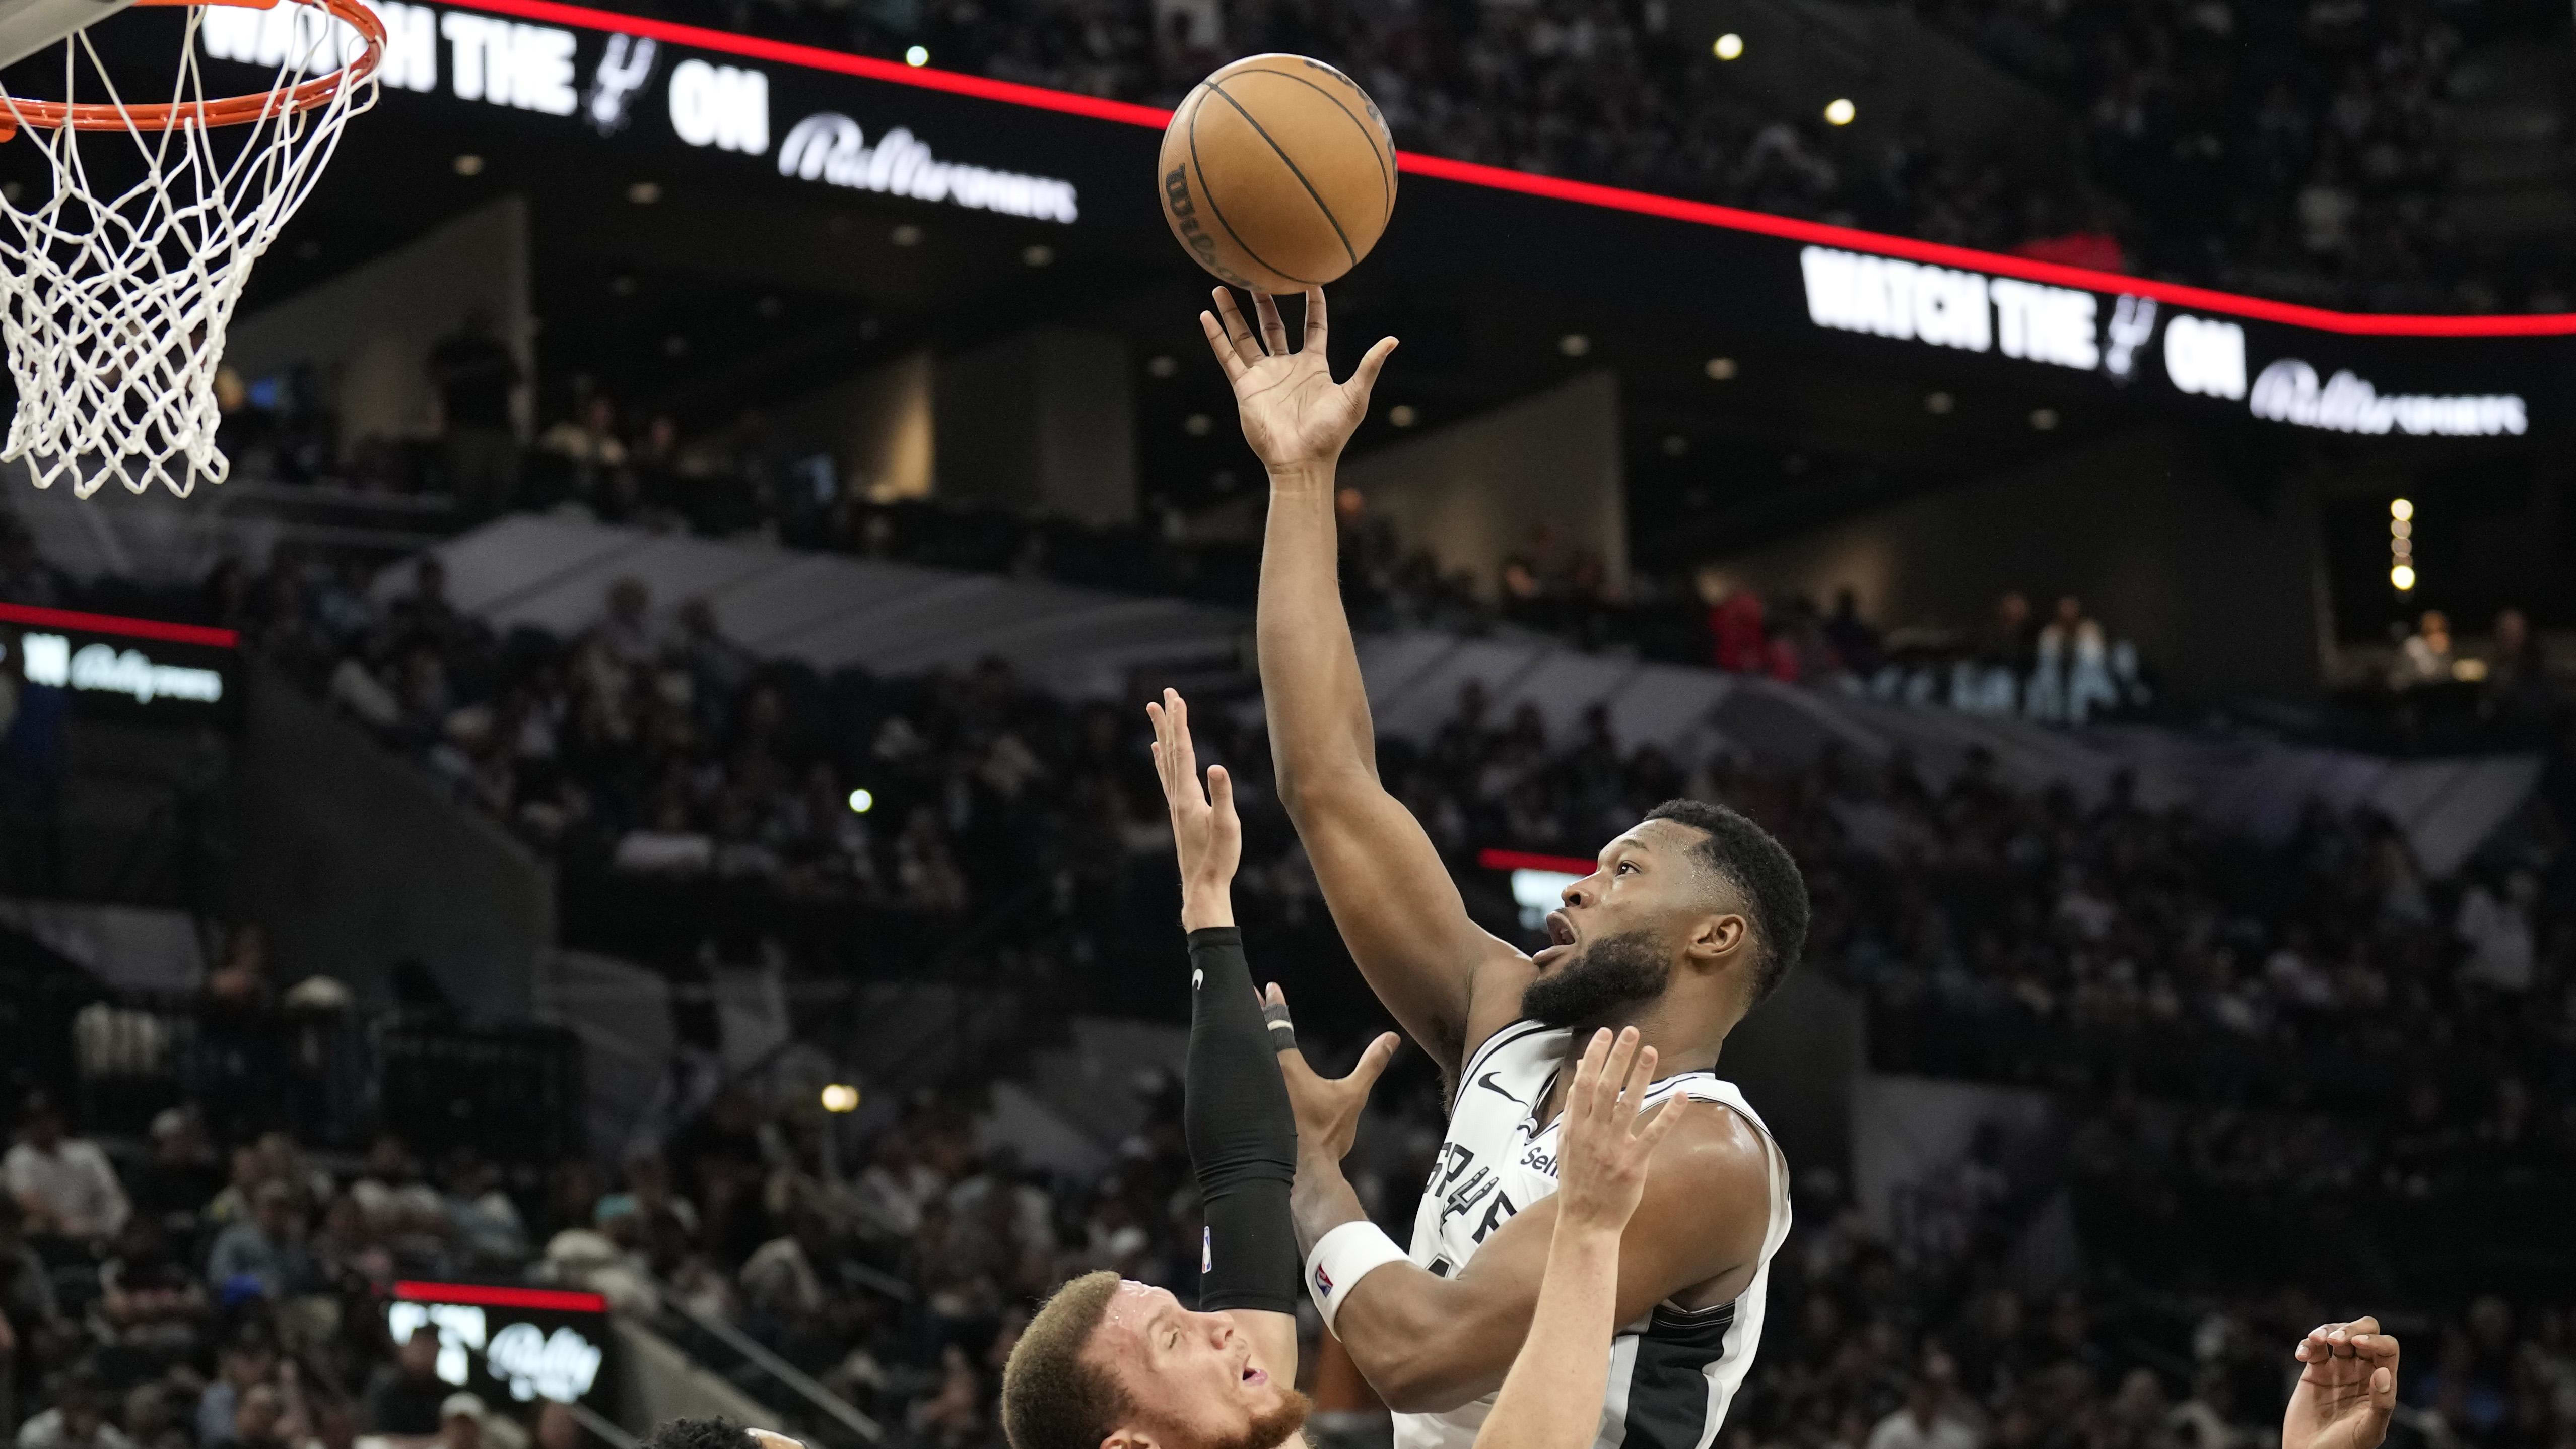 RaiQuan Gray Excels in Debut Season with the Austin Spurs: Breakdown of Stats & Potential